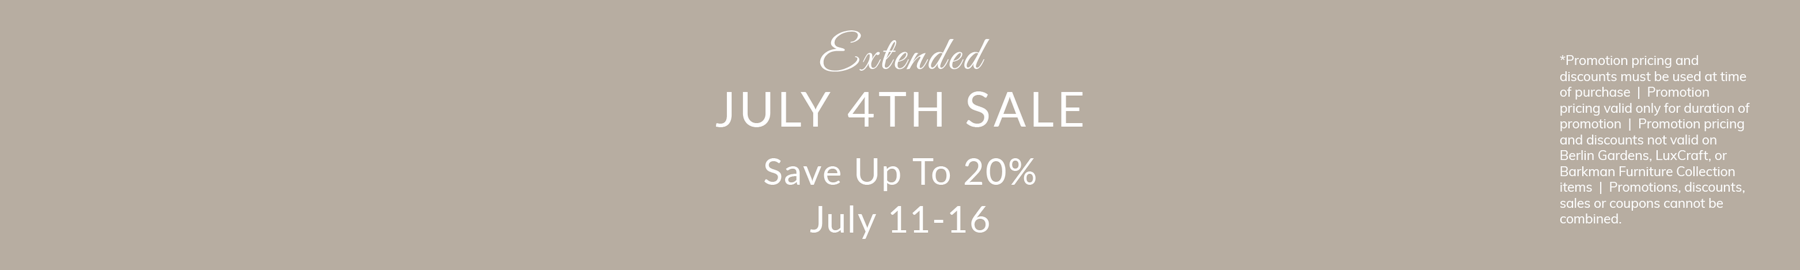 Extended July 4th Sale